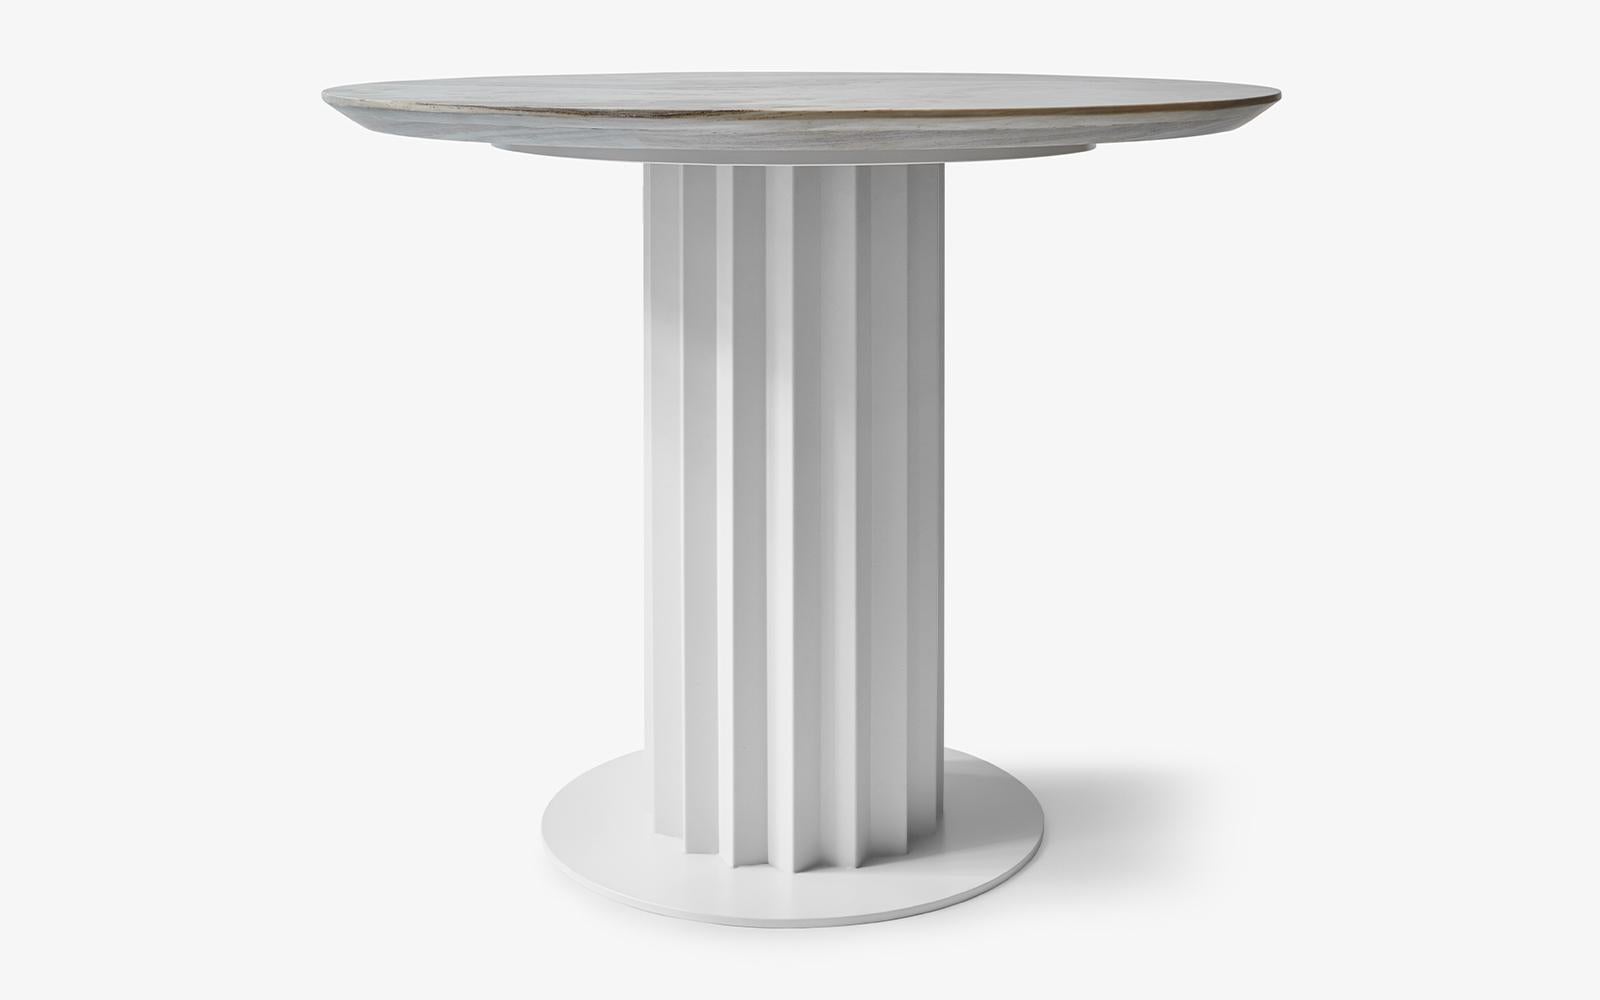 Recalled circular table brings a historical aesthetic to your home...

Taking its inspiration from ancient cities, the RECALLED series brings the fascinating aesthetics of the past to daily lives. The dining tables, which reveal the strong style of